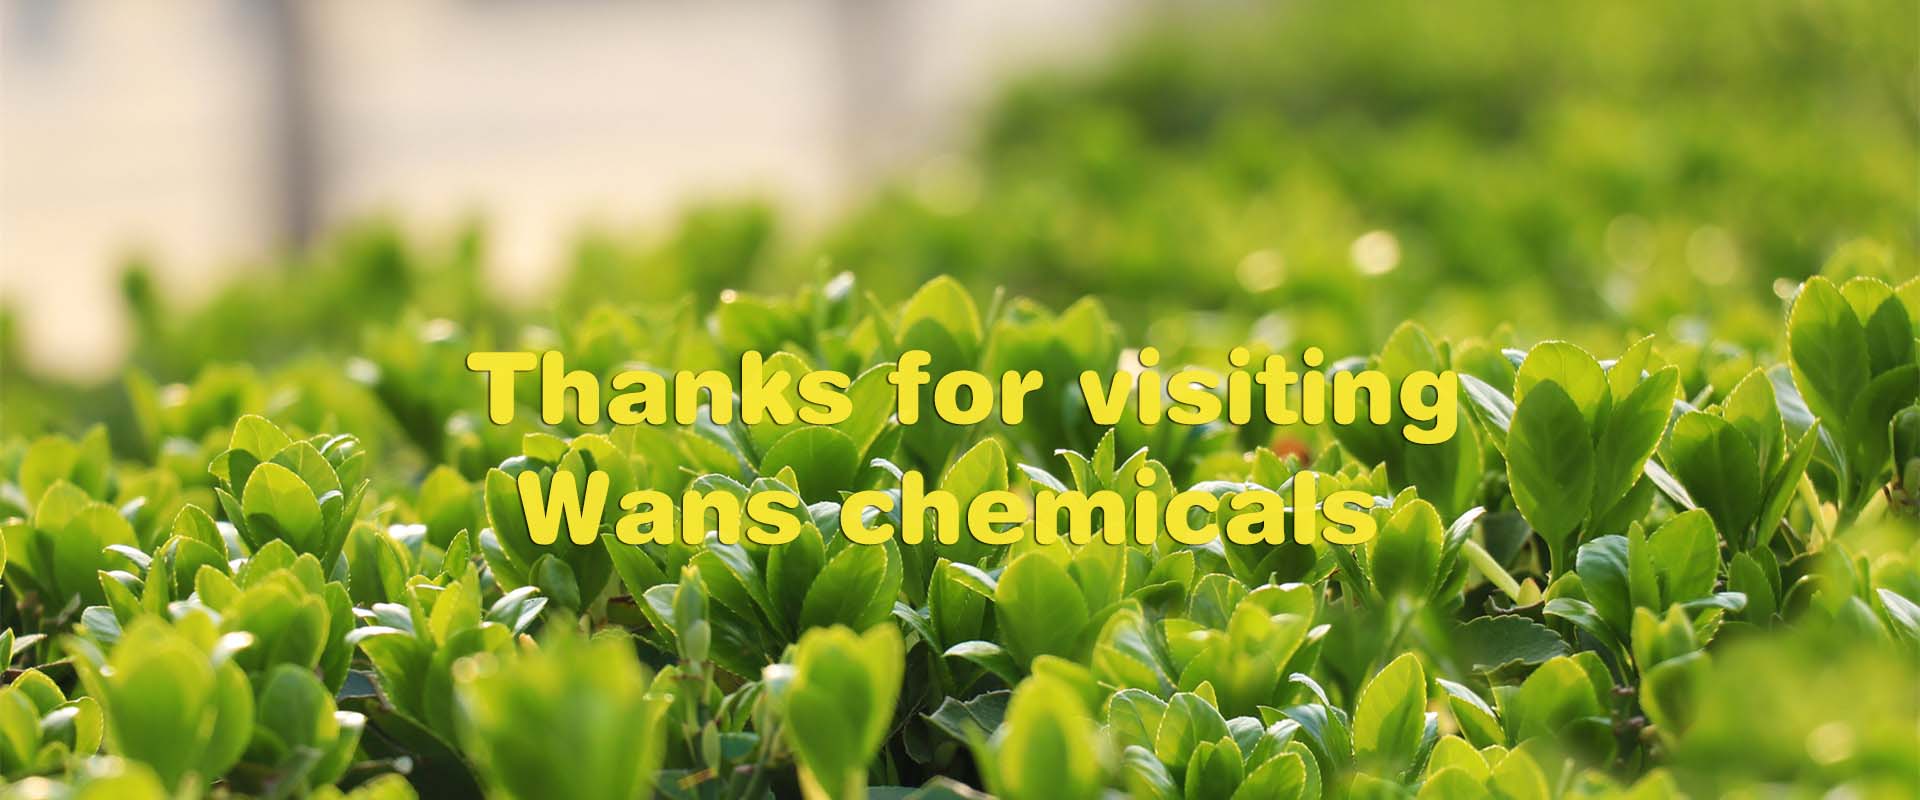 tanks for visiting wanschemicals